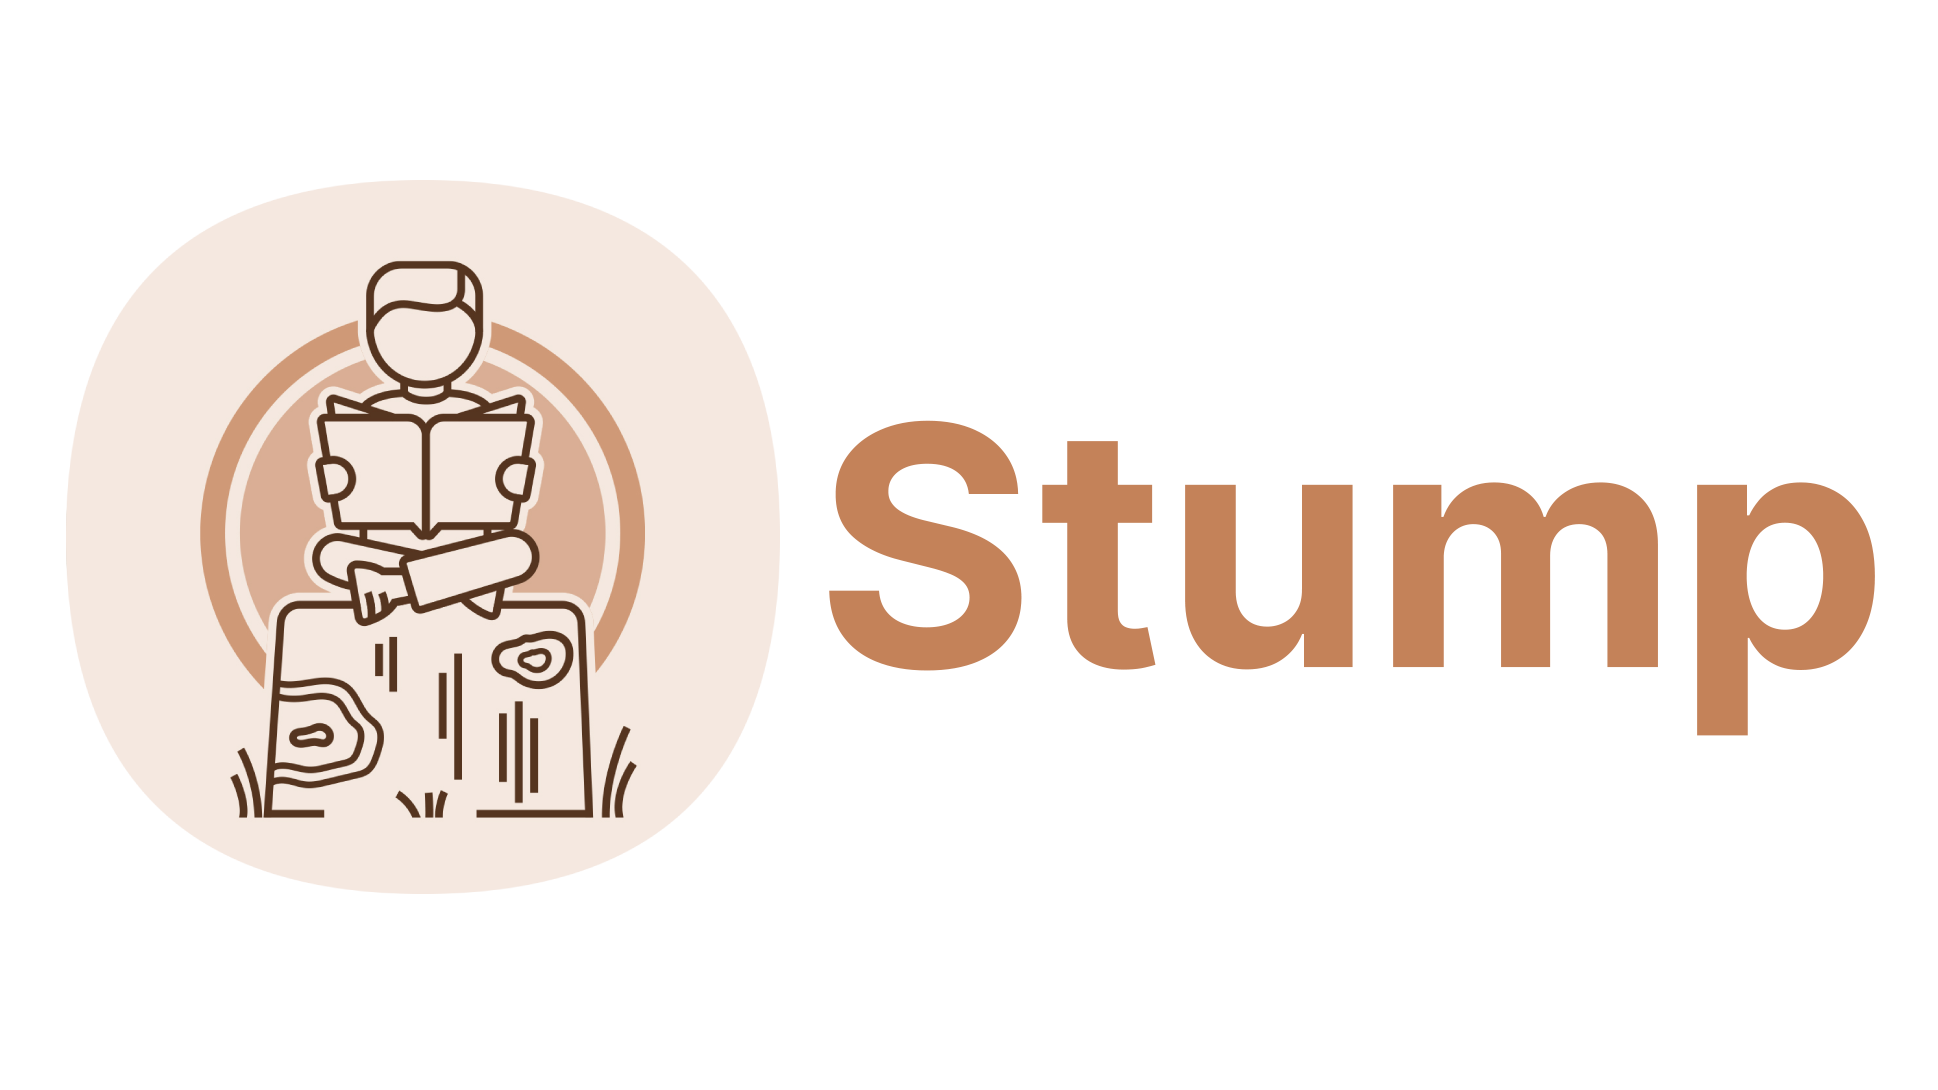 Stump's logo. Description: A young individual sitting on a tree stump reading a book. Inspired by Stump's creator's childhood, where a large amount of his time was spent sitting on a tree stump reading his comic books.